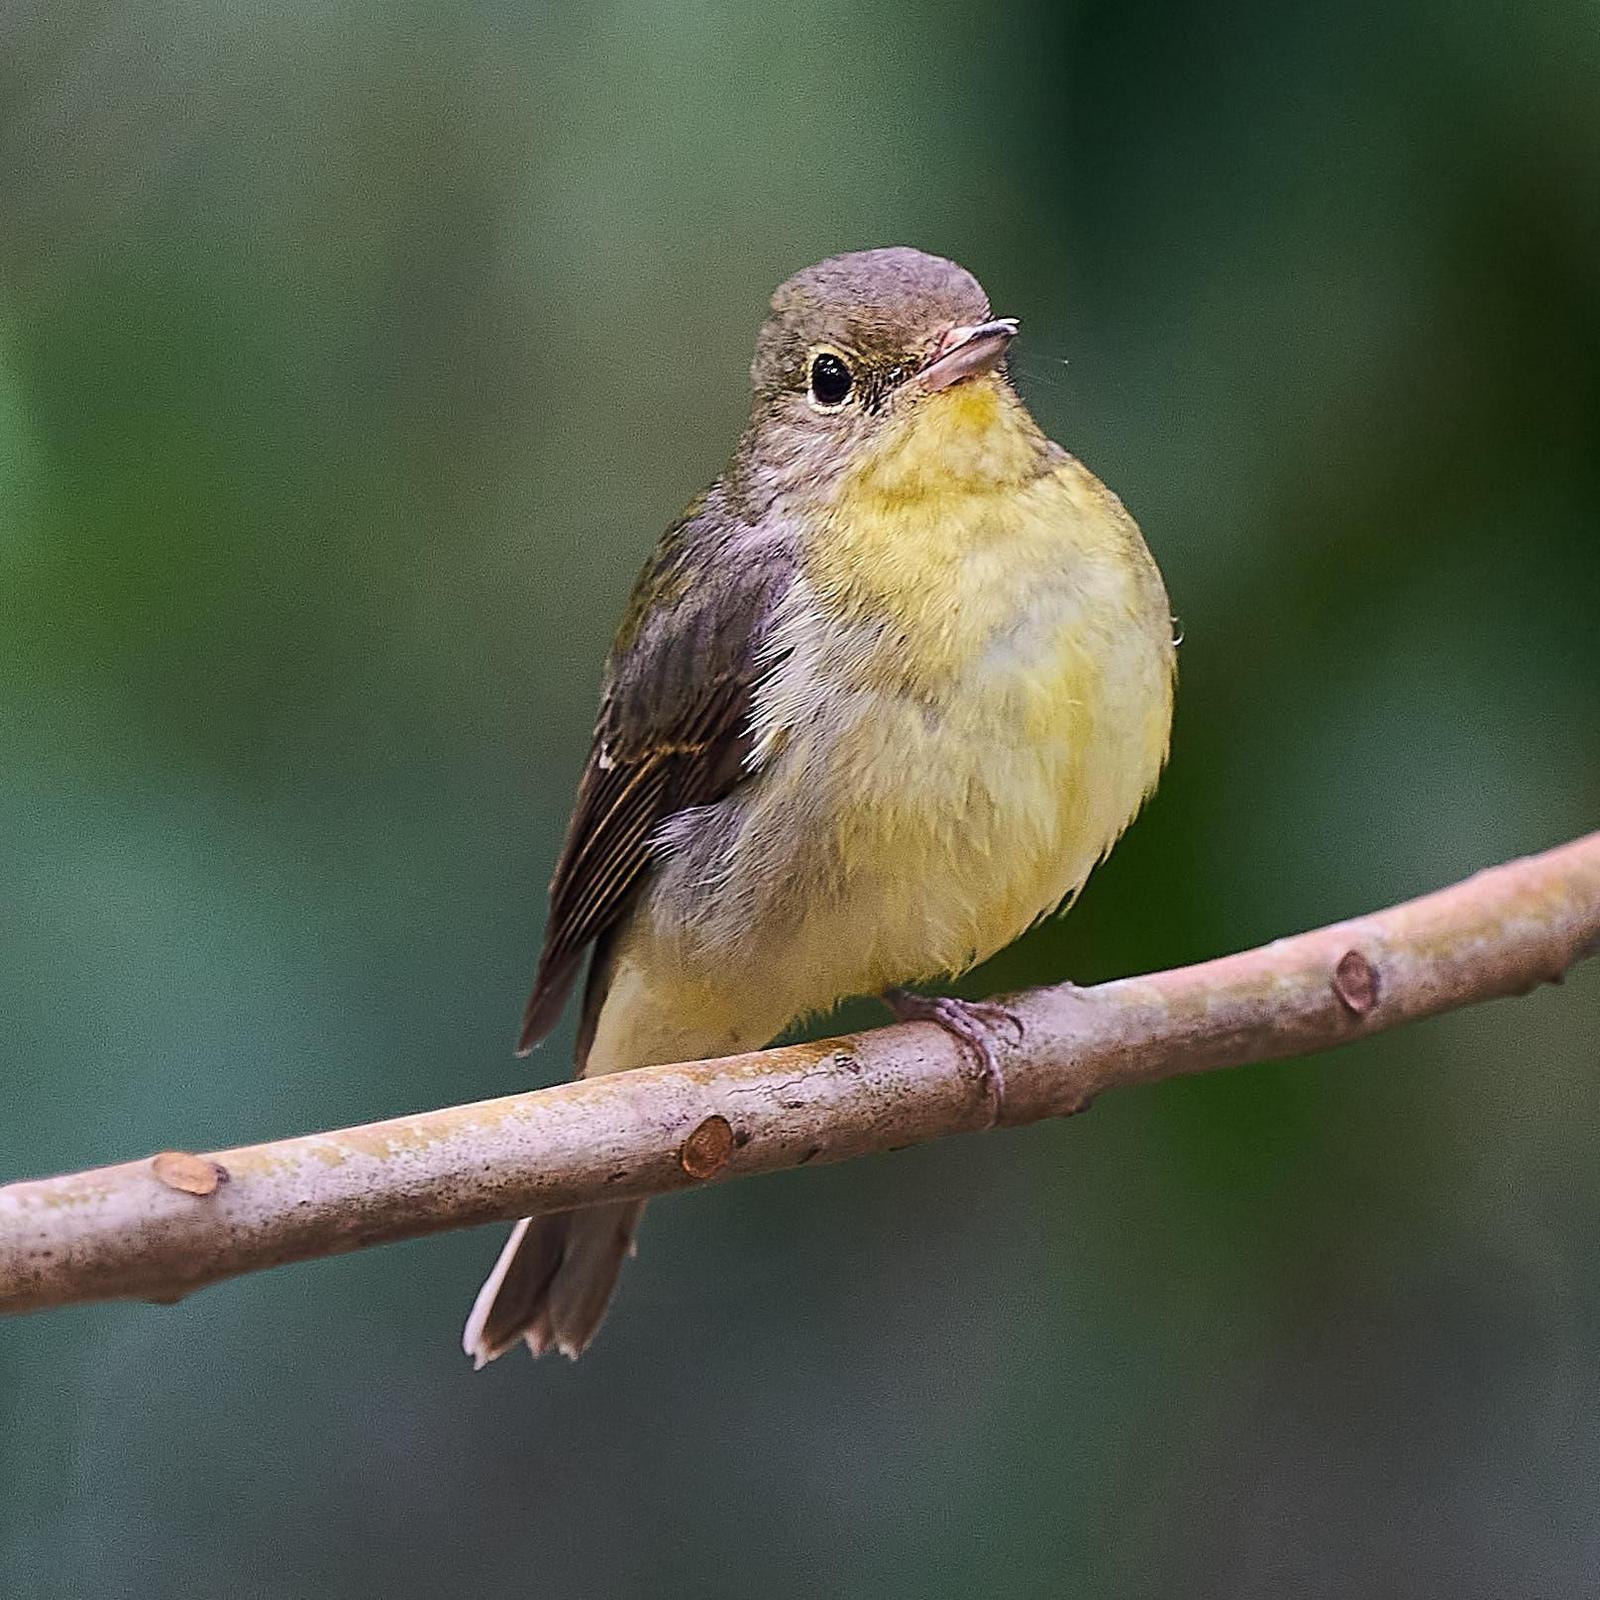 Green-backed Flycatcher Photo by Steven Cheong